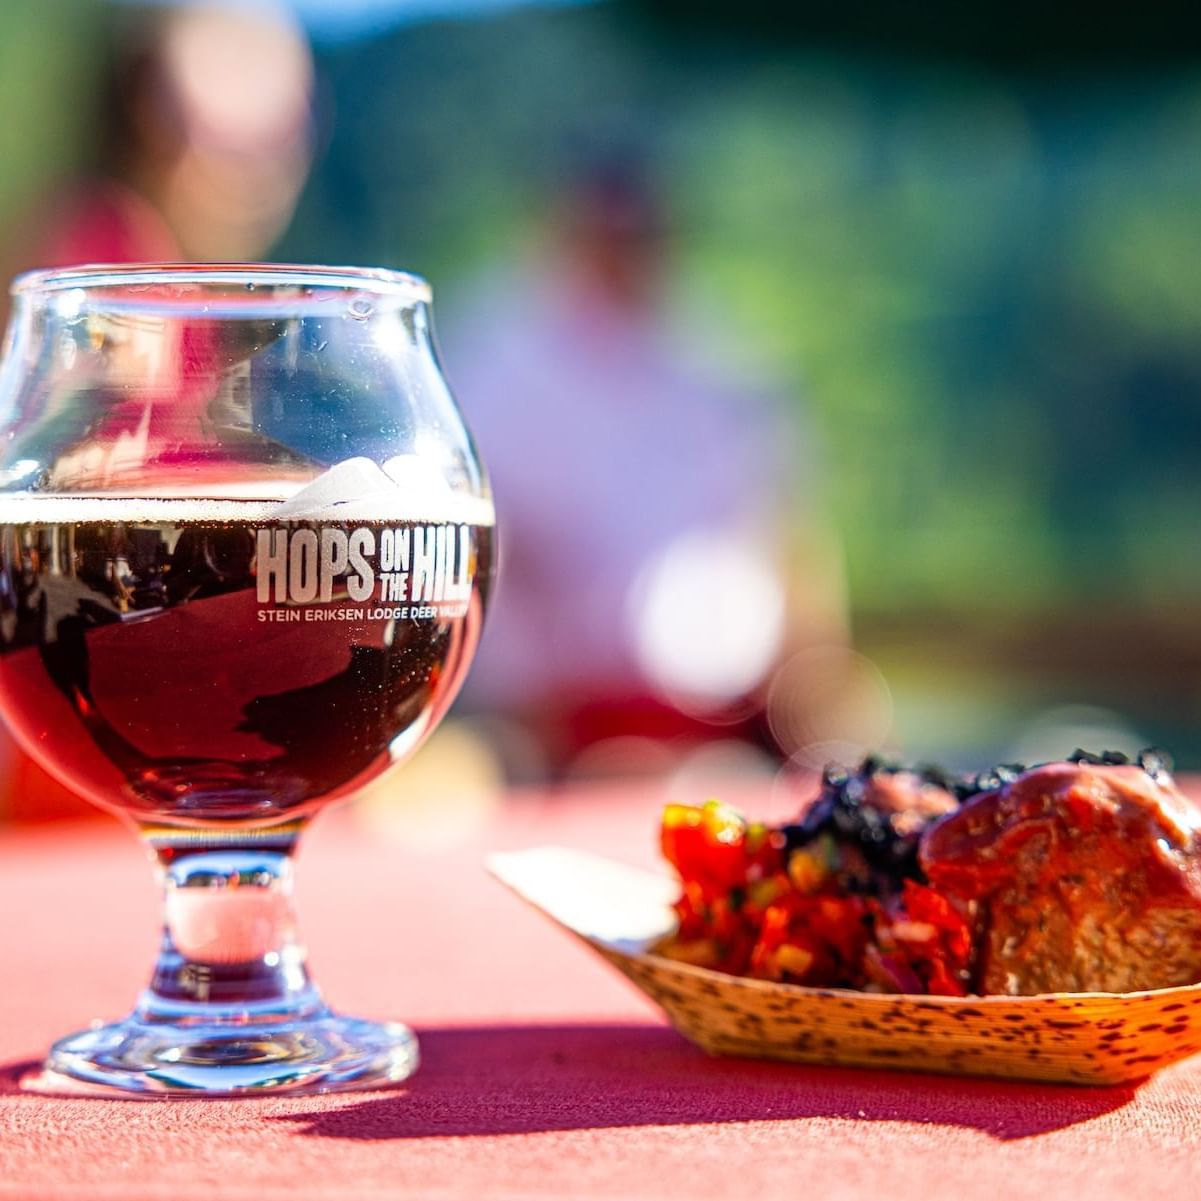 Close-up of glass of beer and a plate of food served at Stein Eriksen Lodge